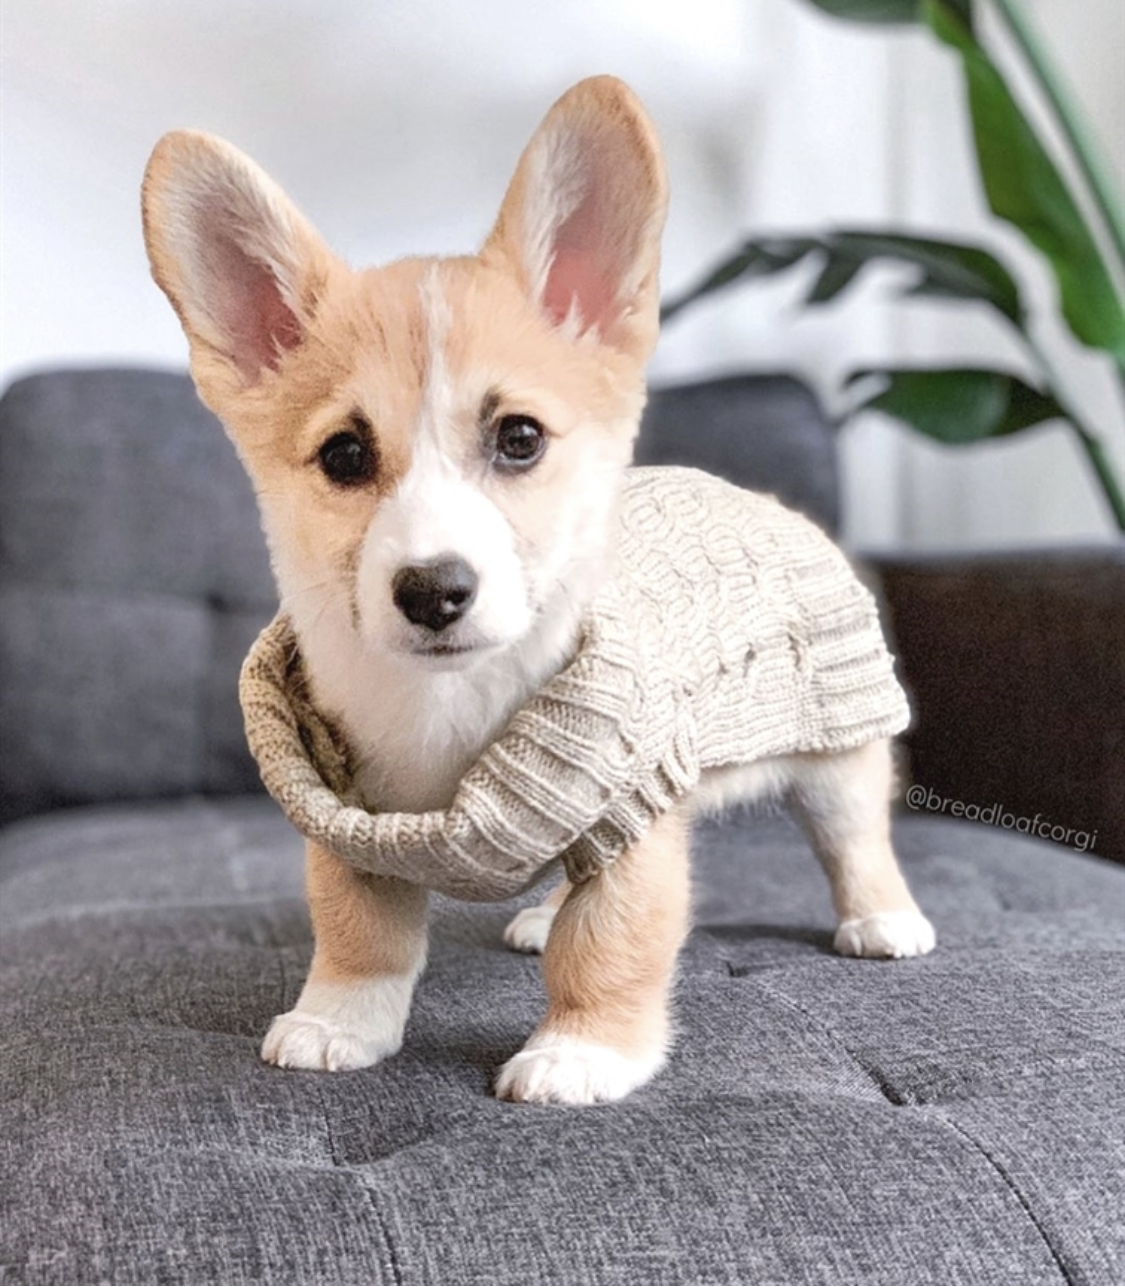 Corgi puppy wearing a sweater while standing on top of the couch